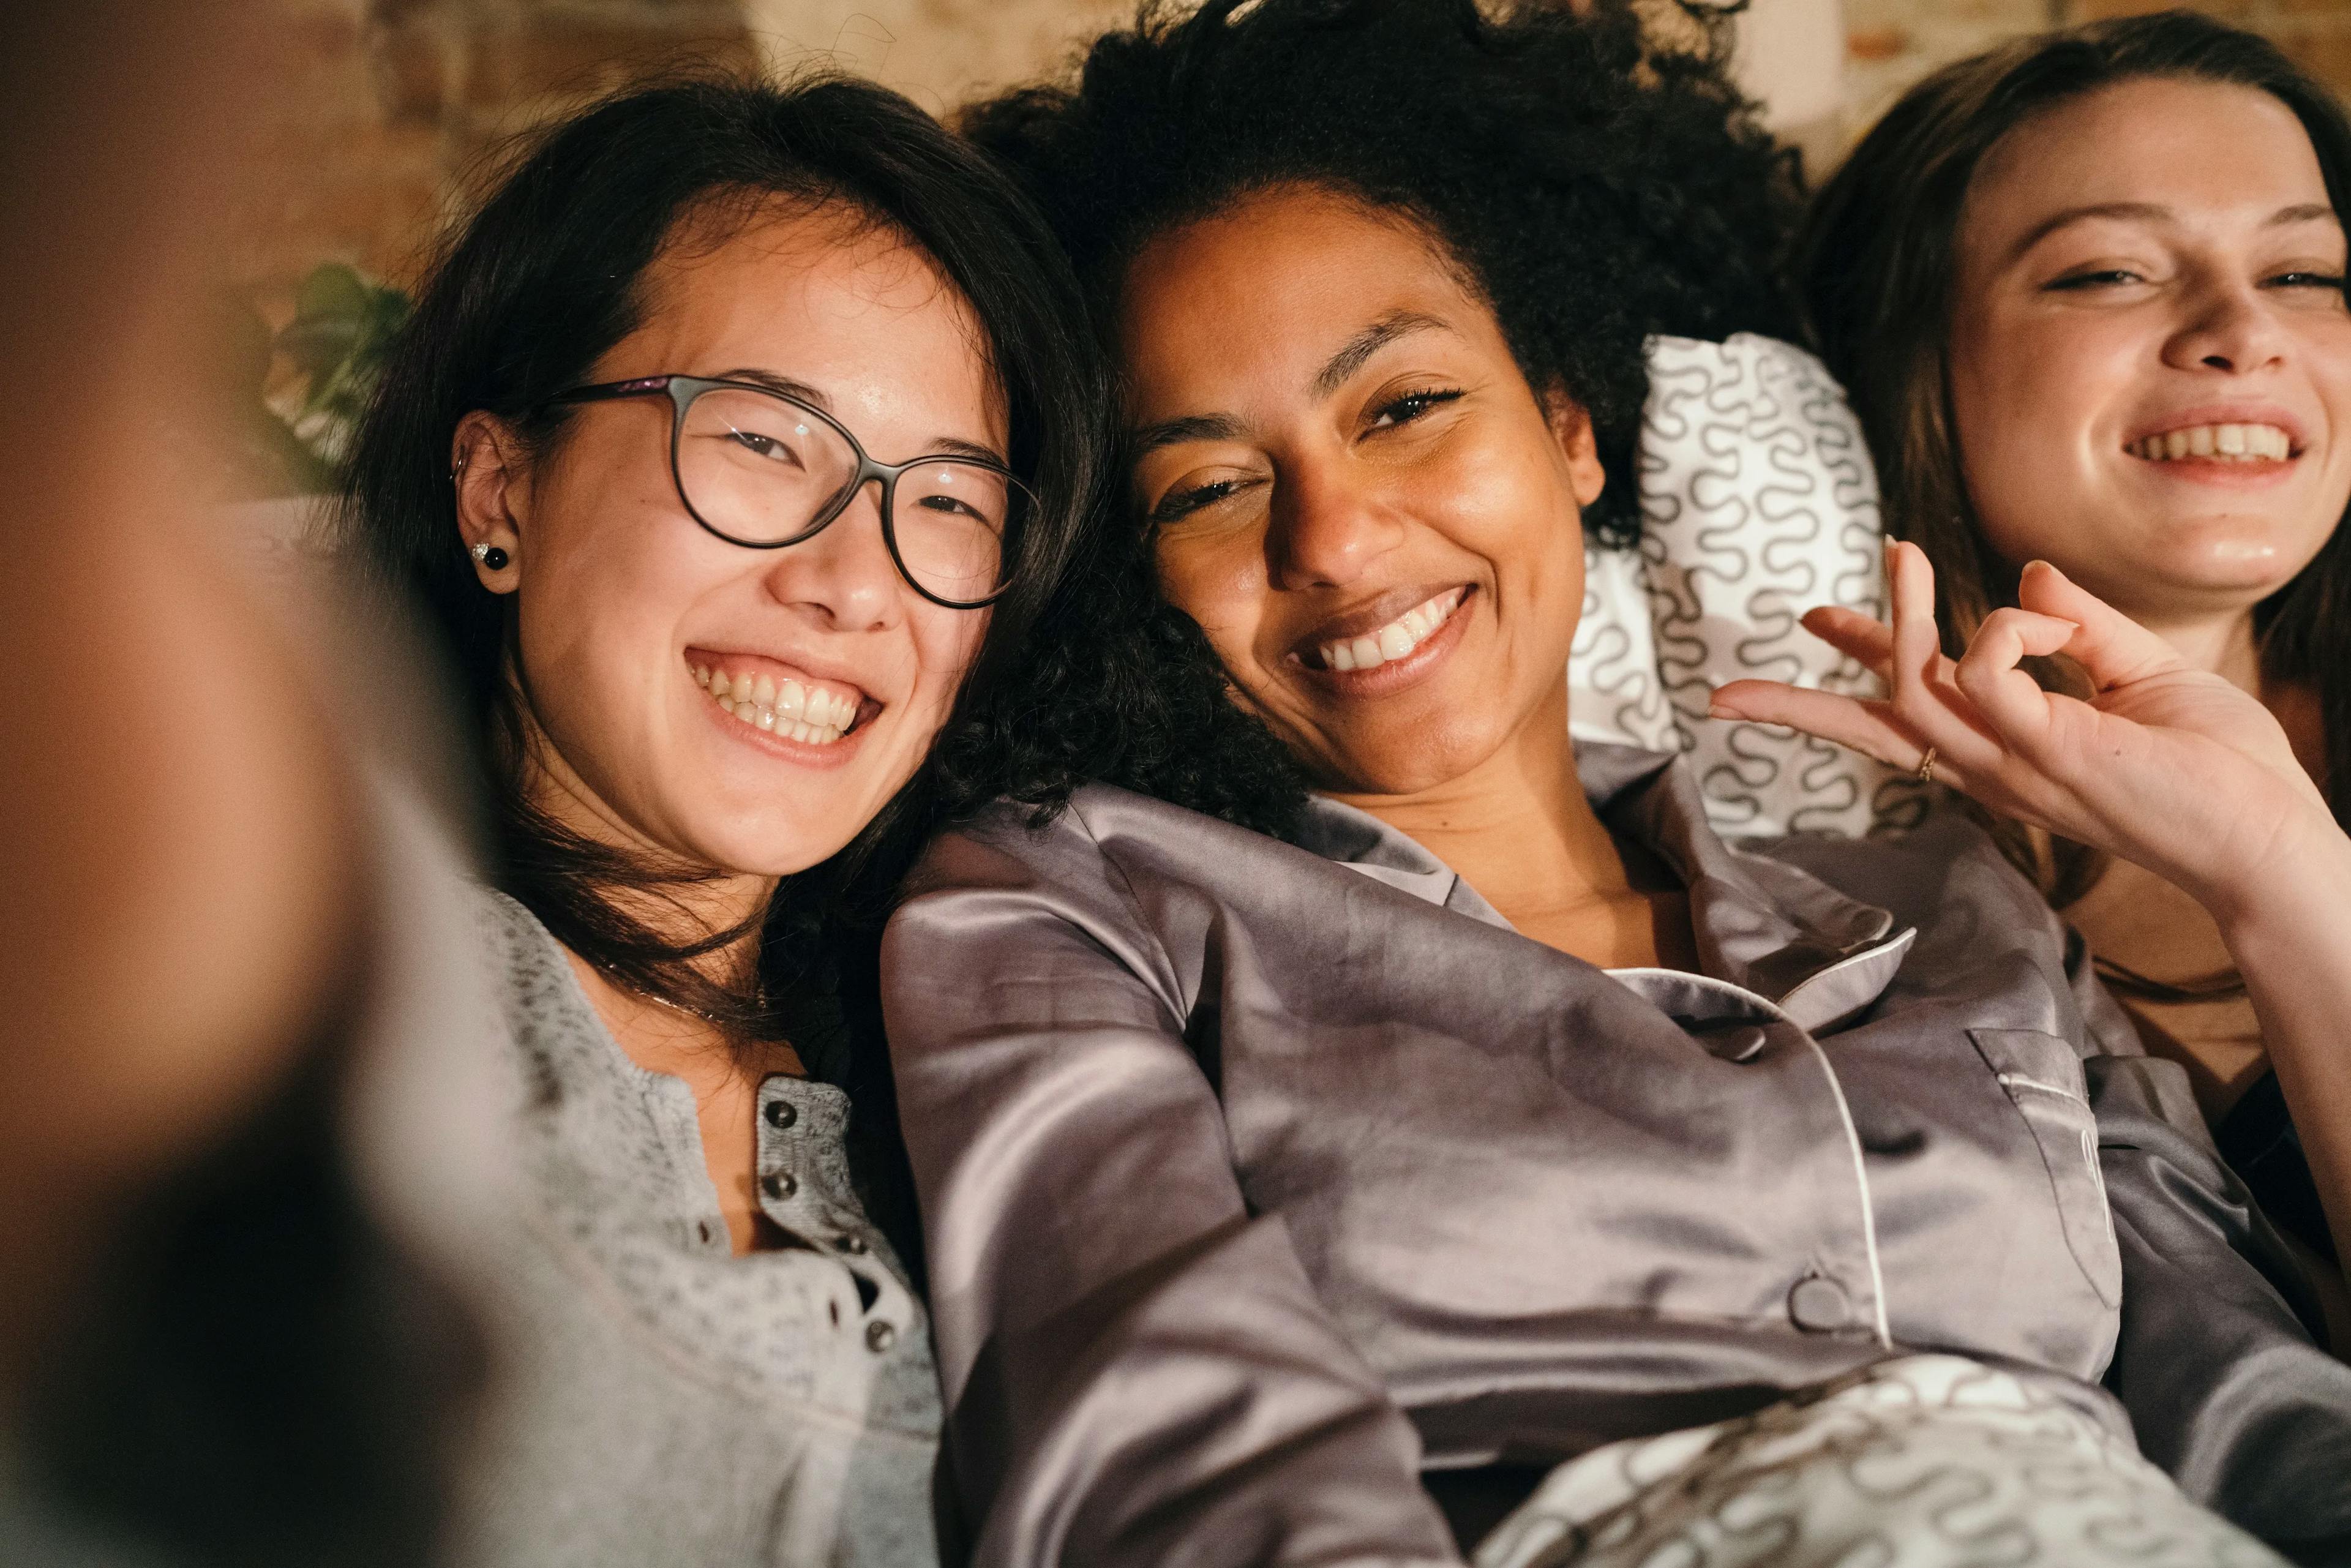 Group of three smiling women on a sofa taking a selfie